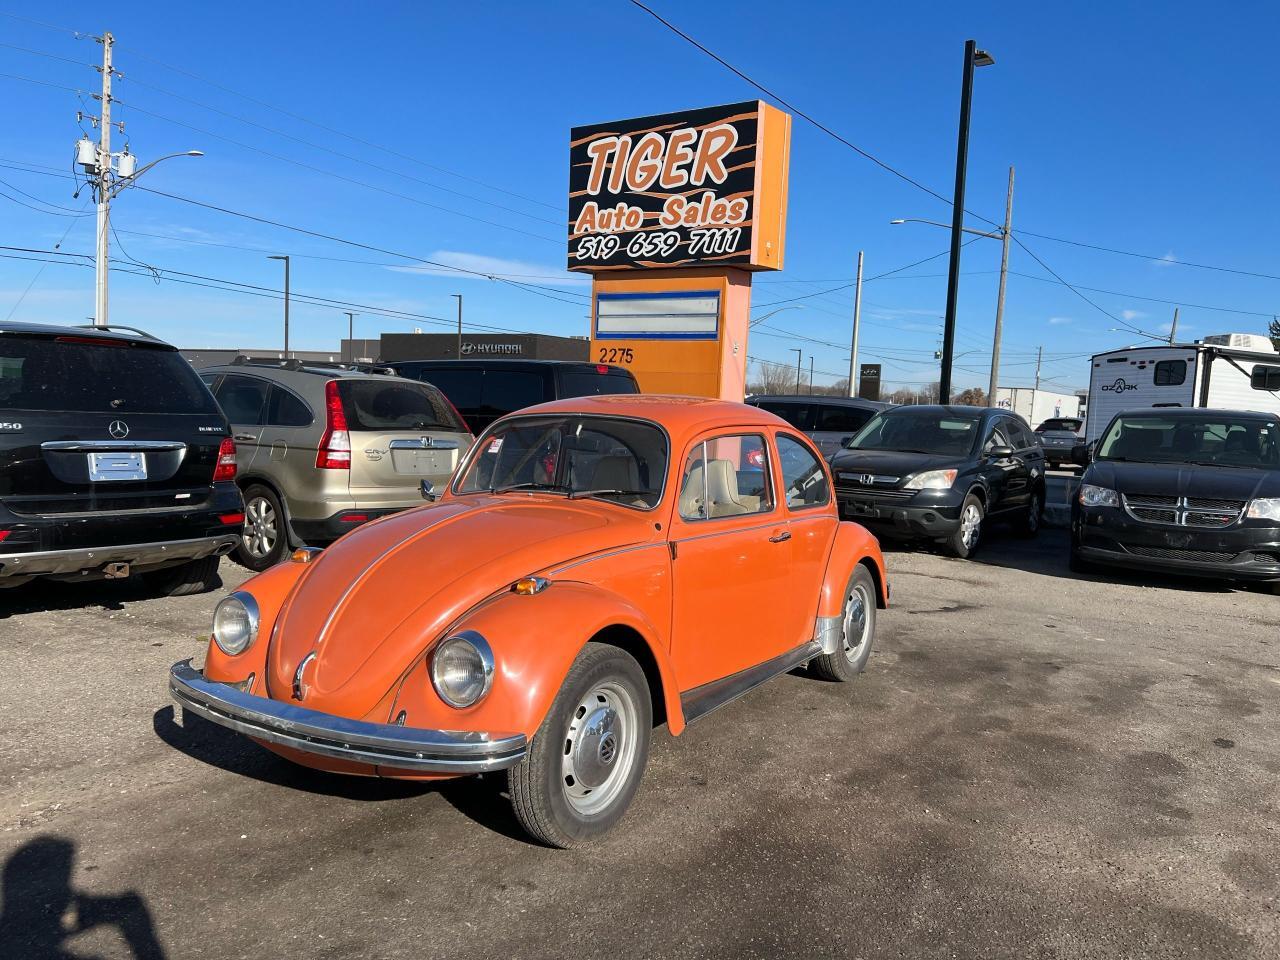 1975 Volkswagen Beetle VERY CLEAN*WELL MAINTAINED*RUNS AND DRIVES GREAT*